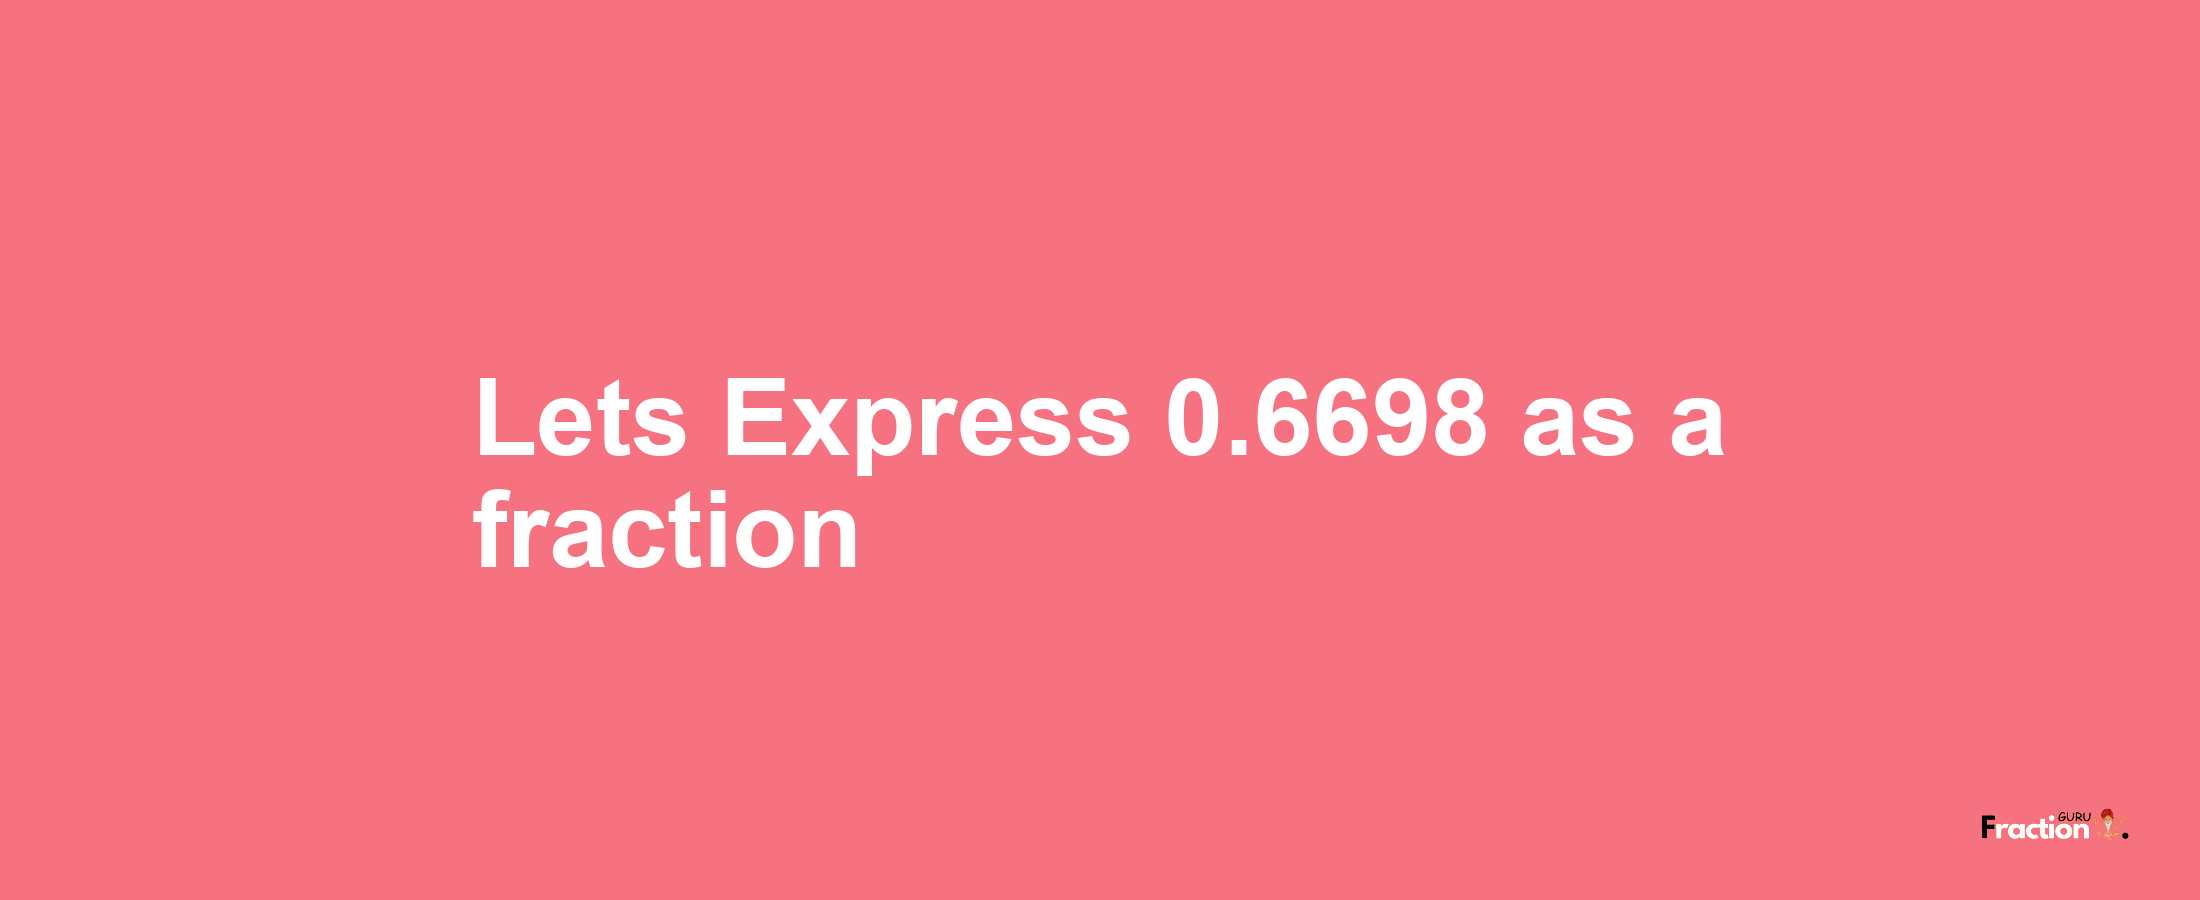 Lets Express 0.6698 as afraction